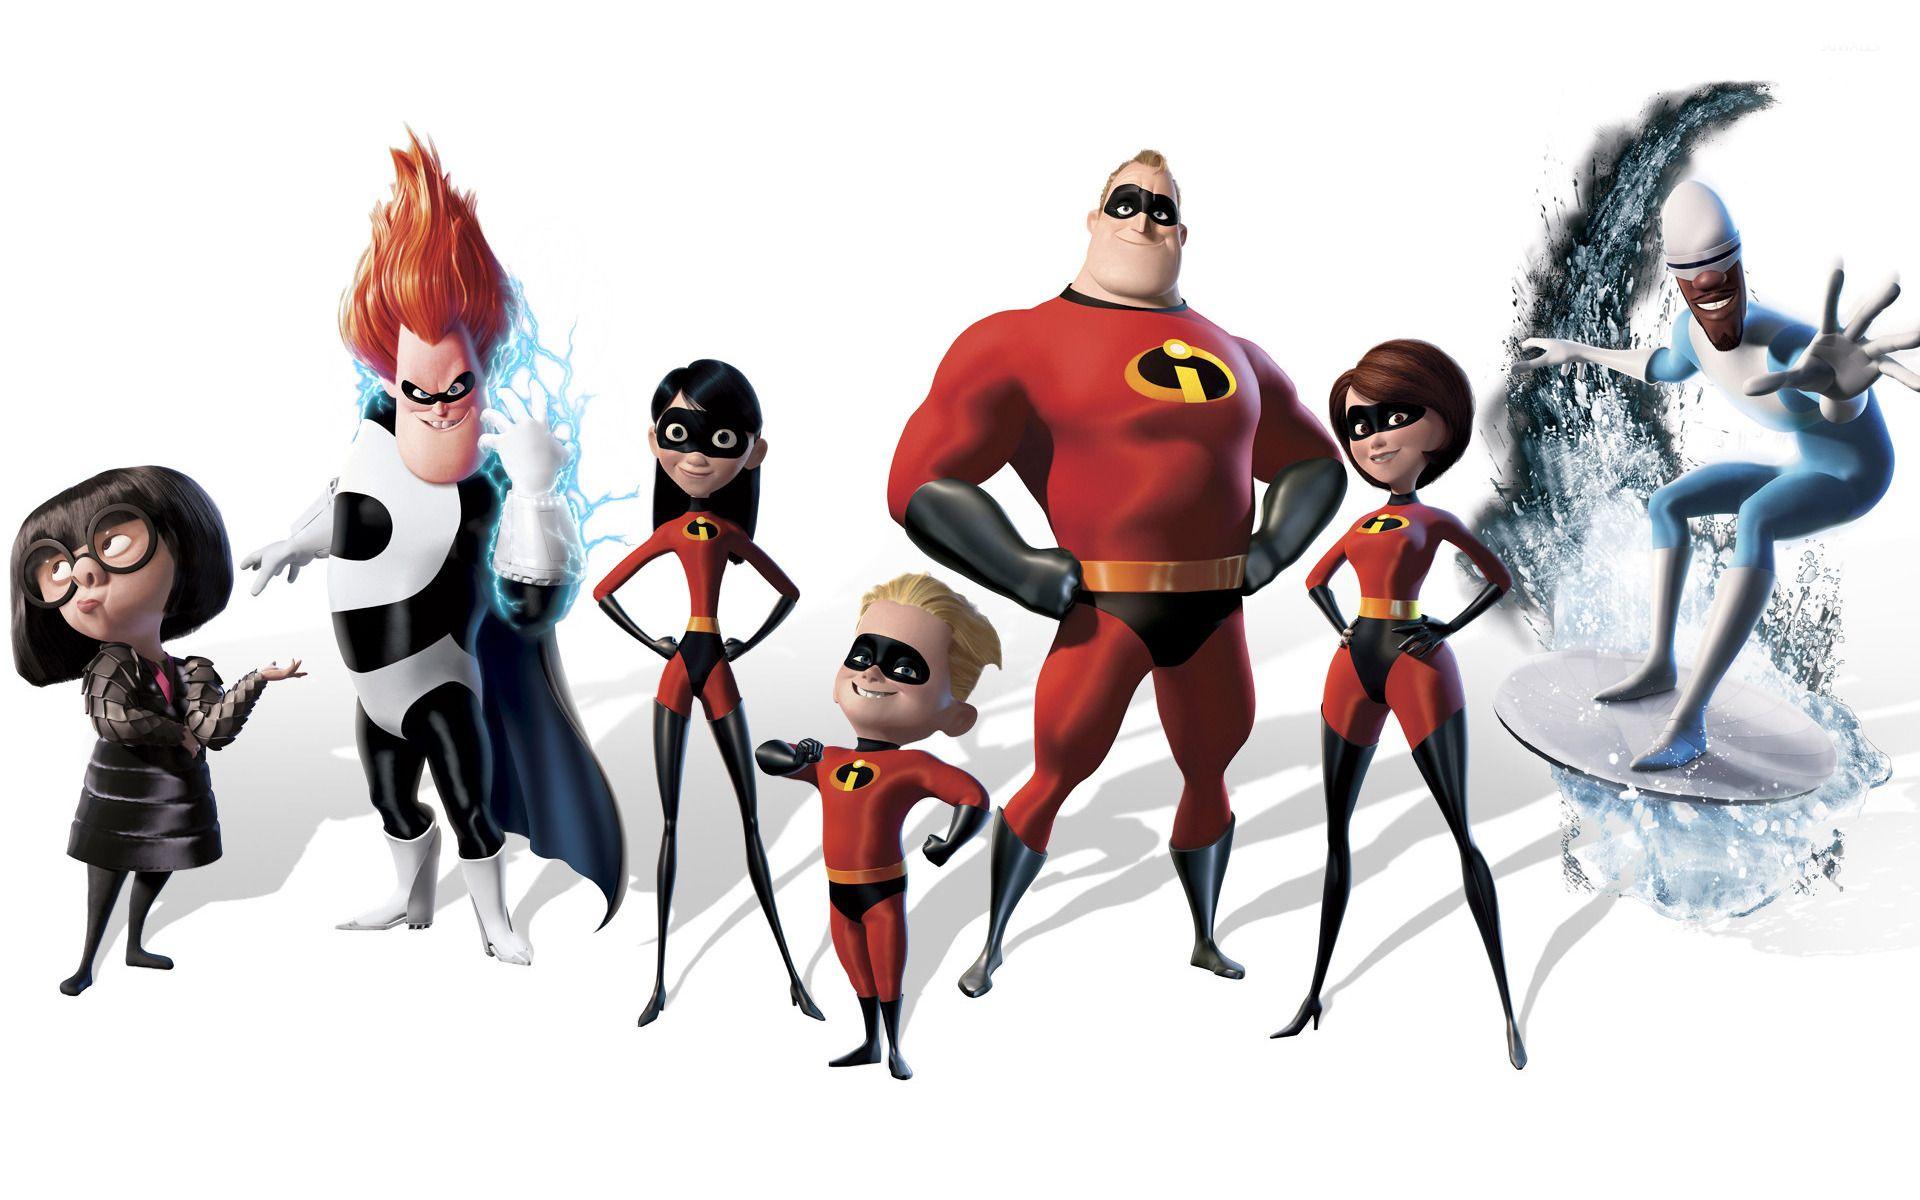 The Incredibles wallpapers